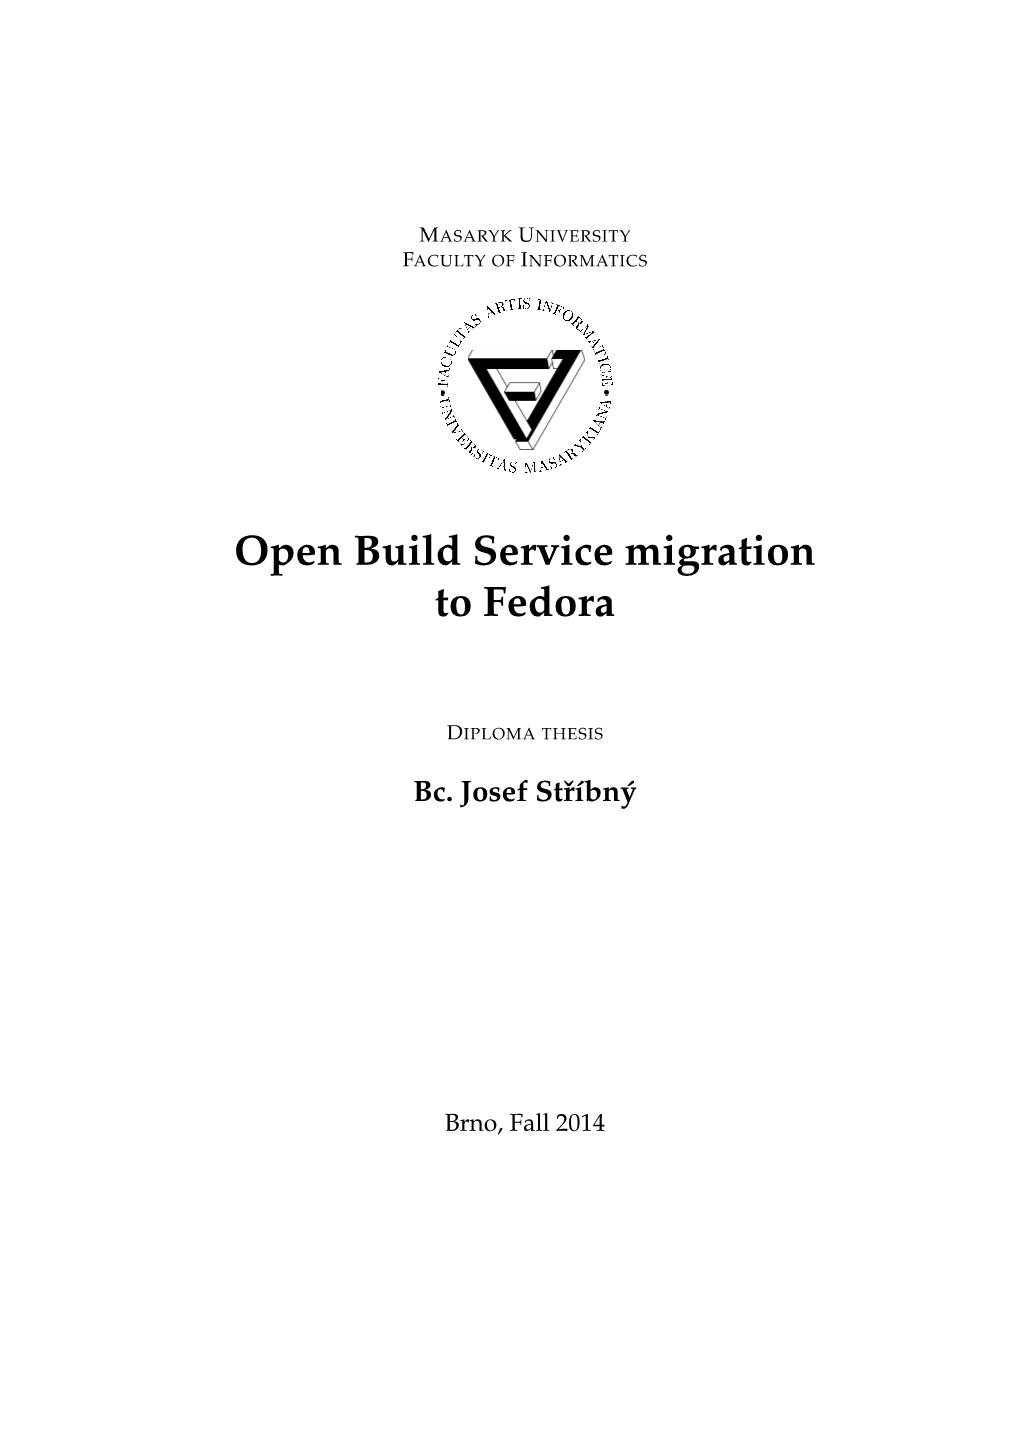 Open Build Service Migration to Fedora